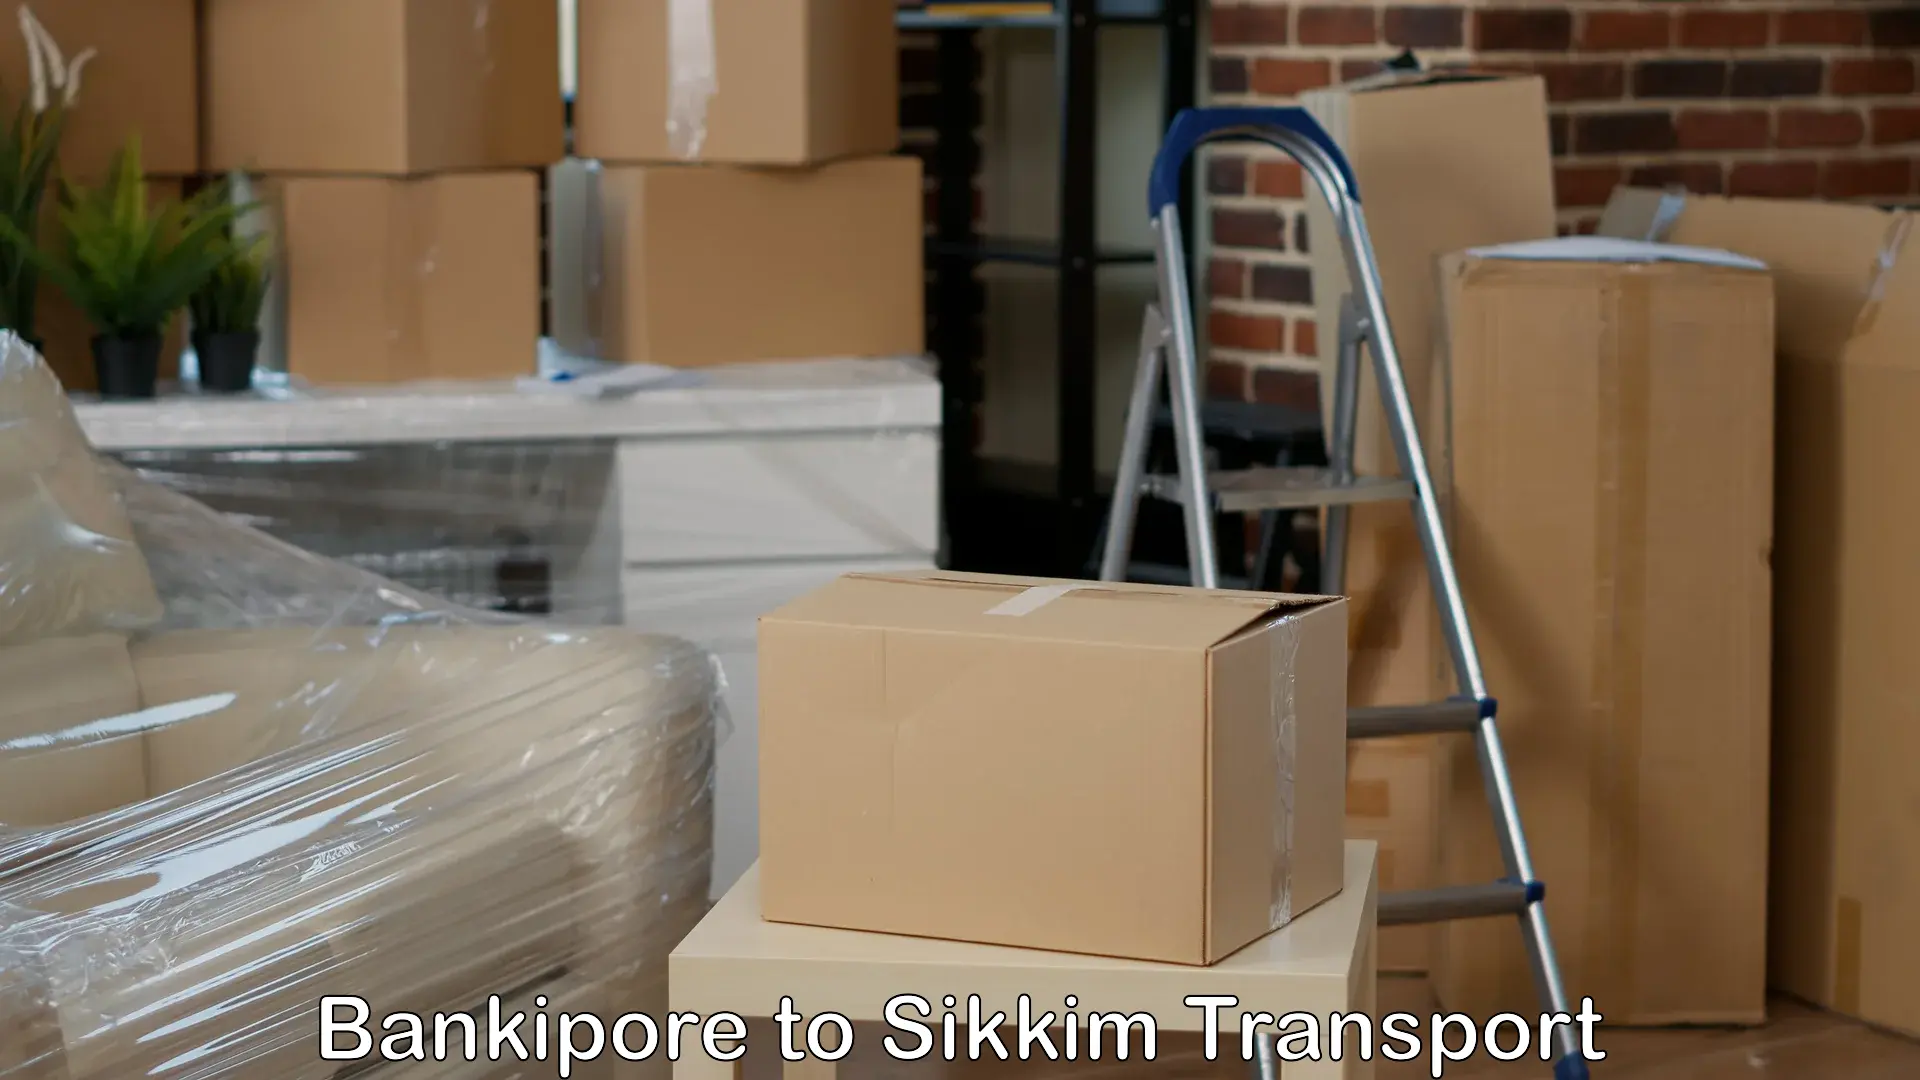 Vehicle transport services Bankipore to North Sikkim